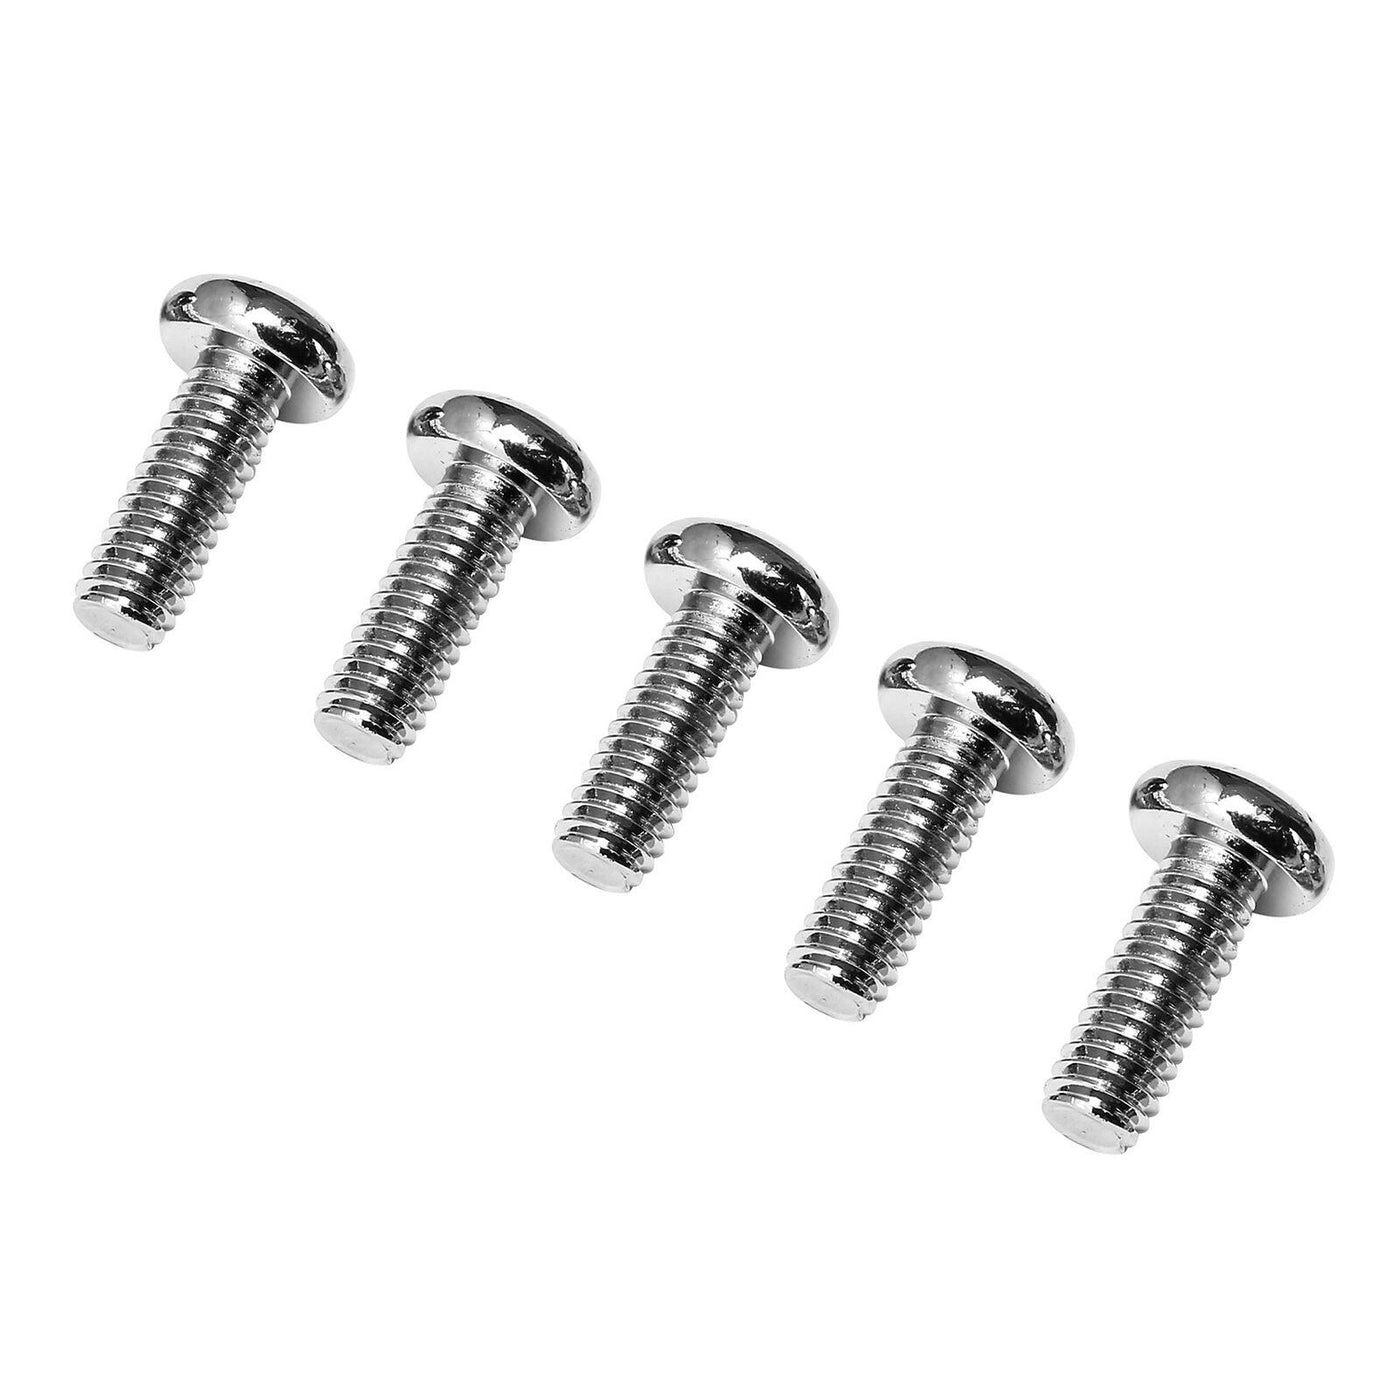 5x Front Disk Brake Rotor Bolts Fit For Harley Davidson Softail Dyna Touring - Moto Life Products